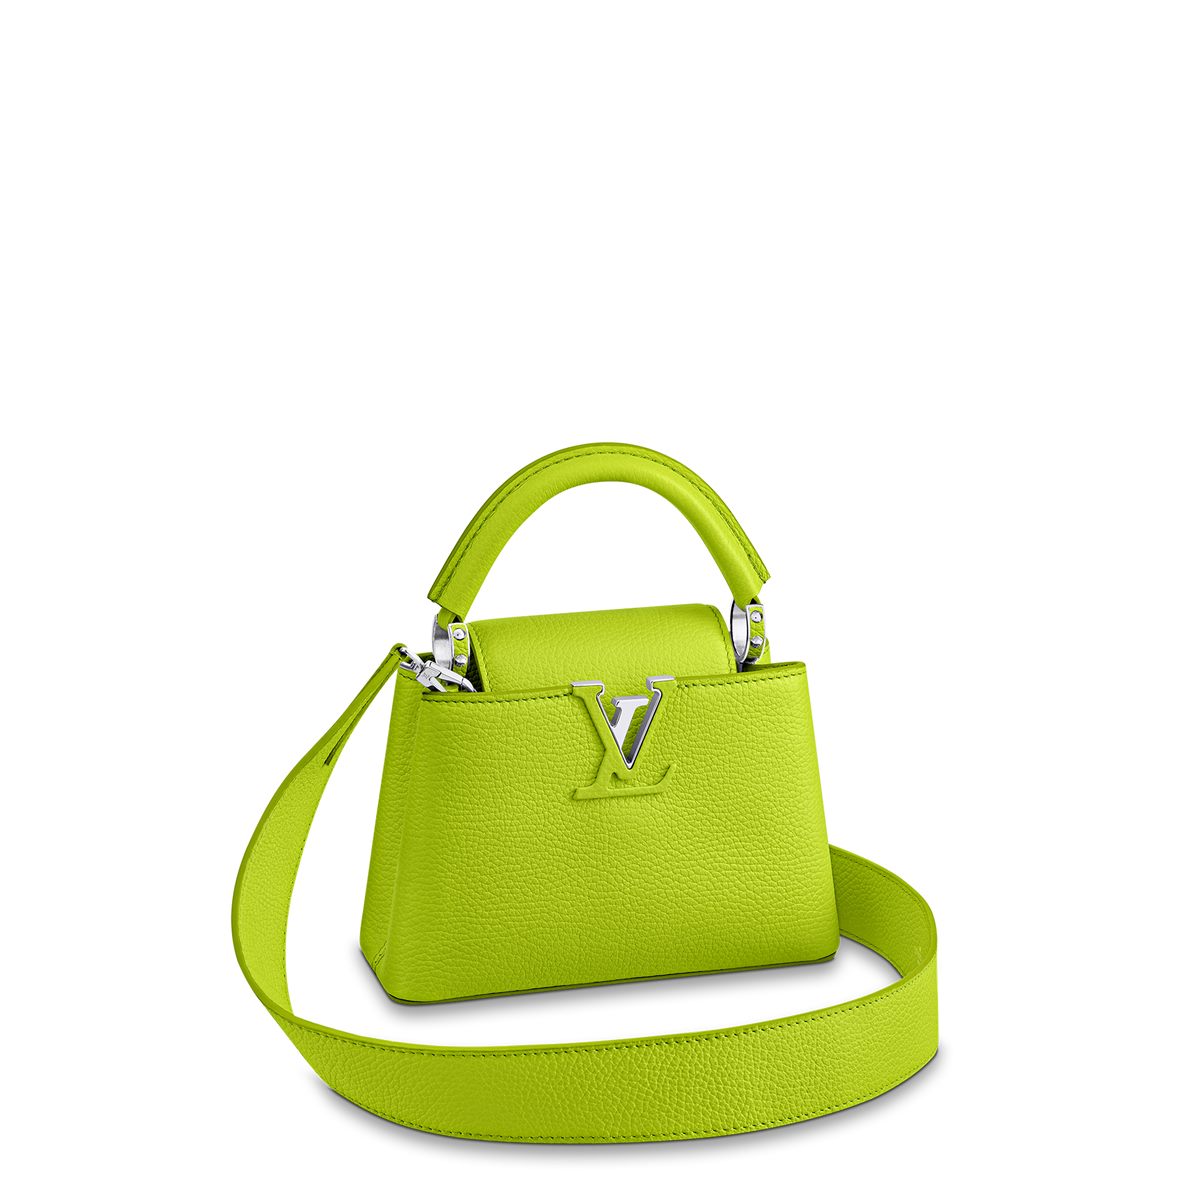 LV_Capucines Mini_chartreuse_in Taurillon leather